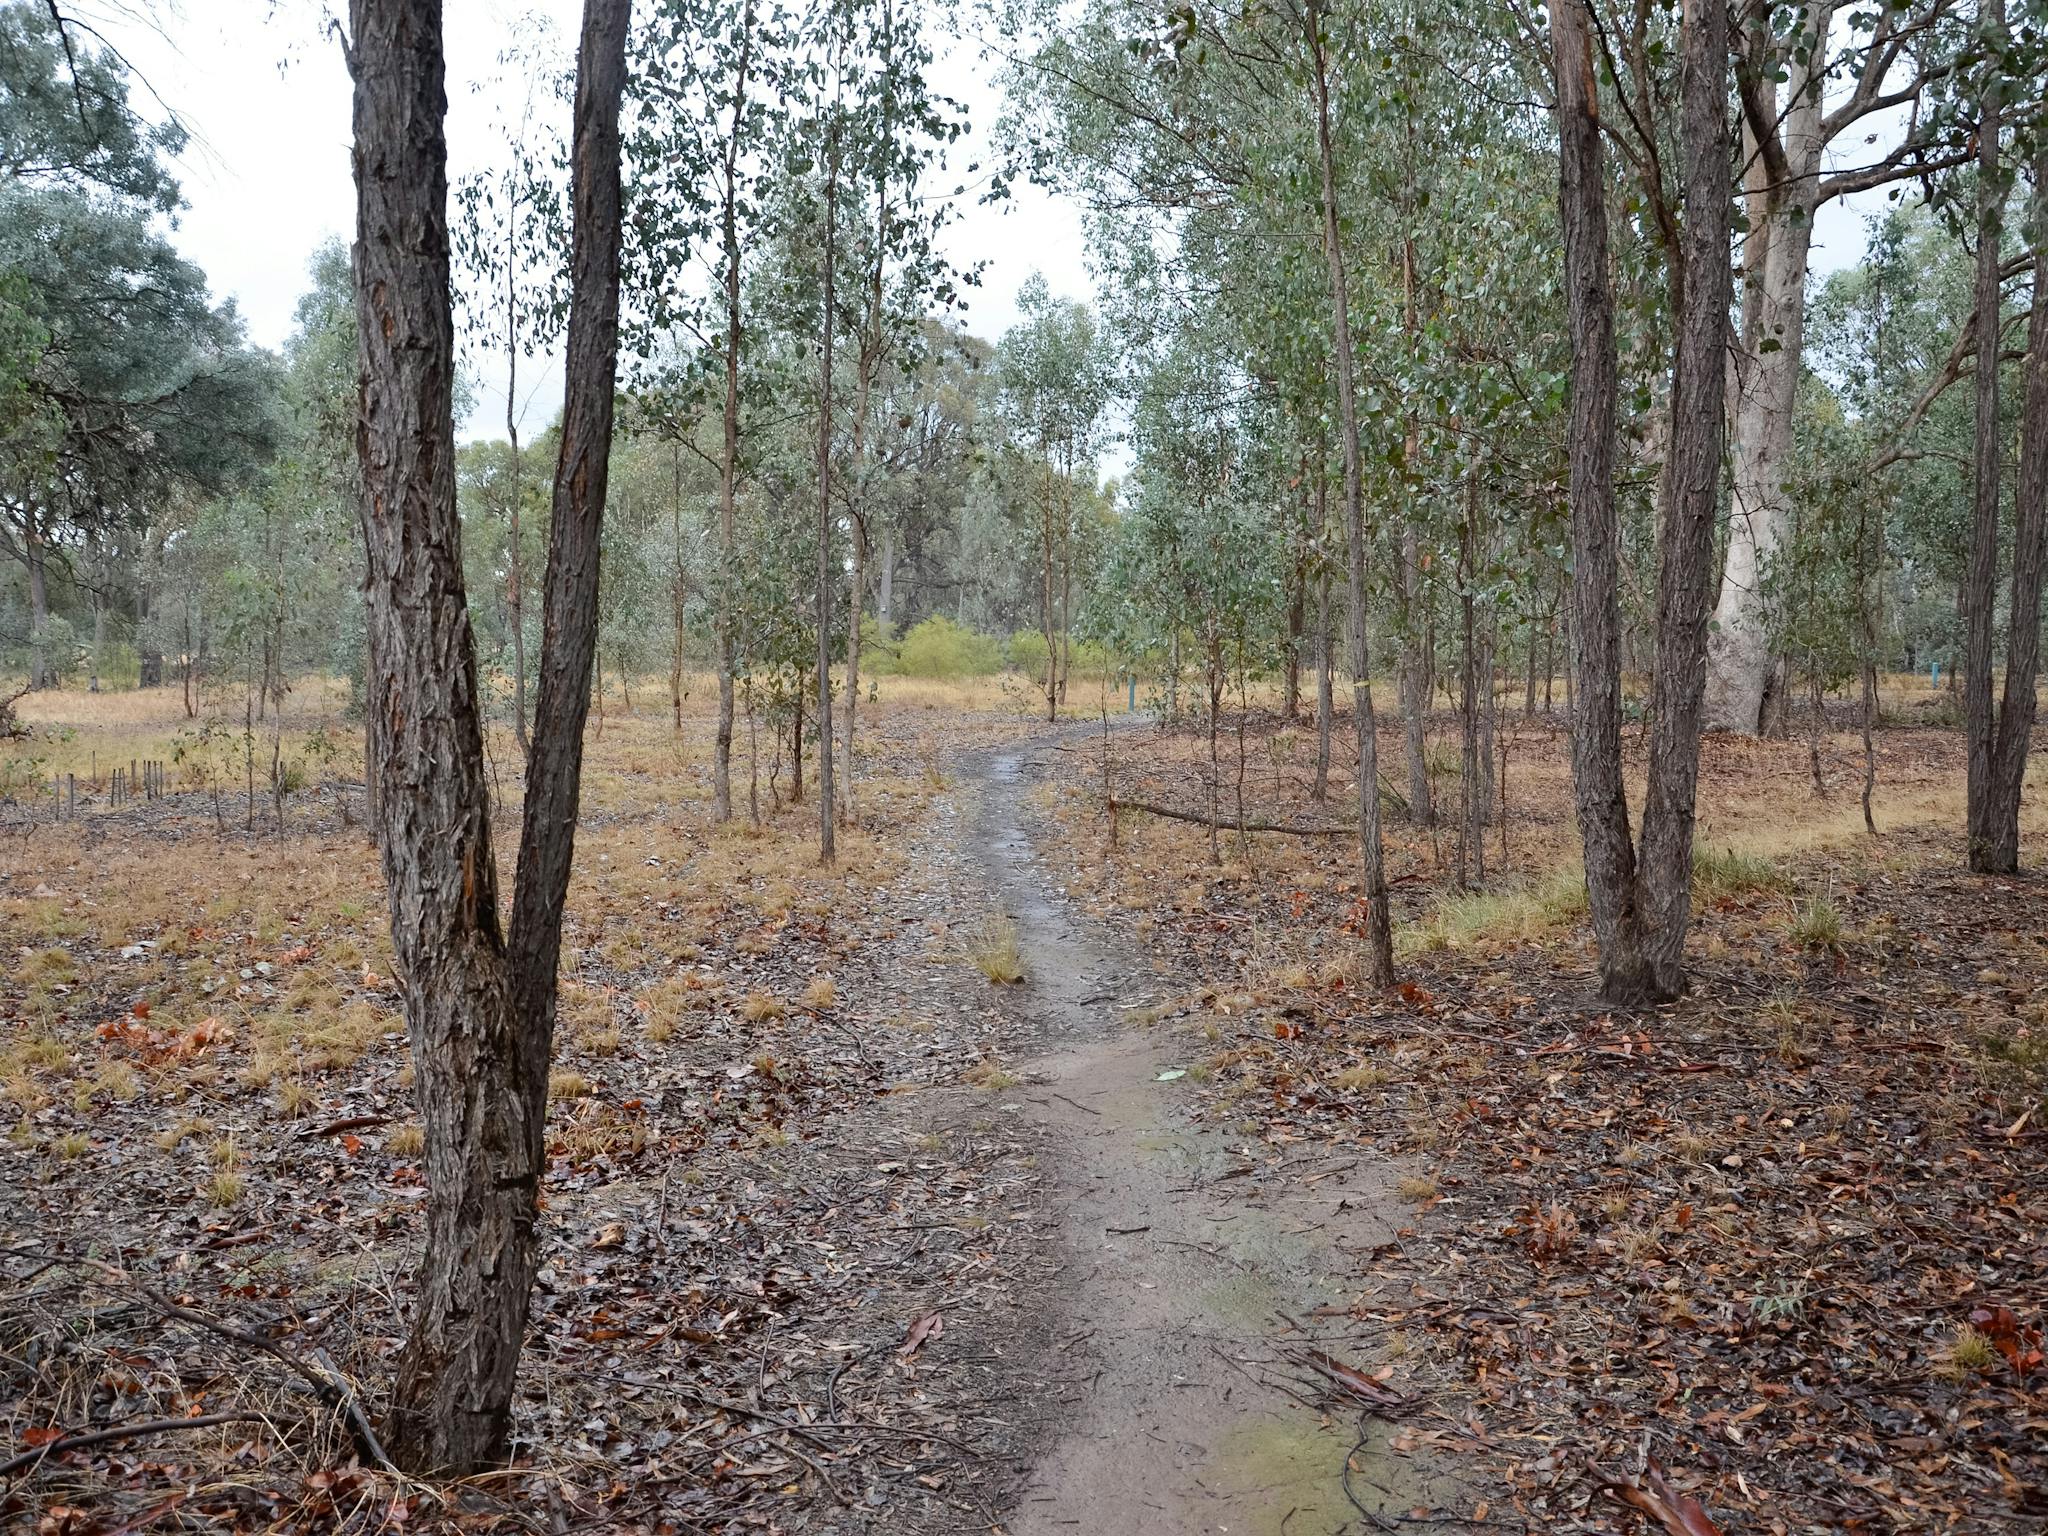 One of the walking paths at Stringybark Reserve.